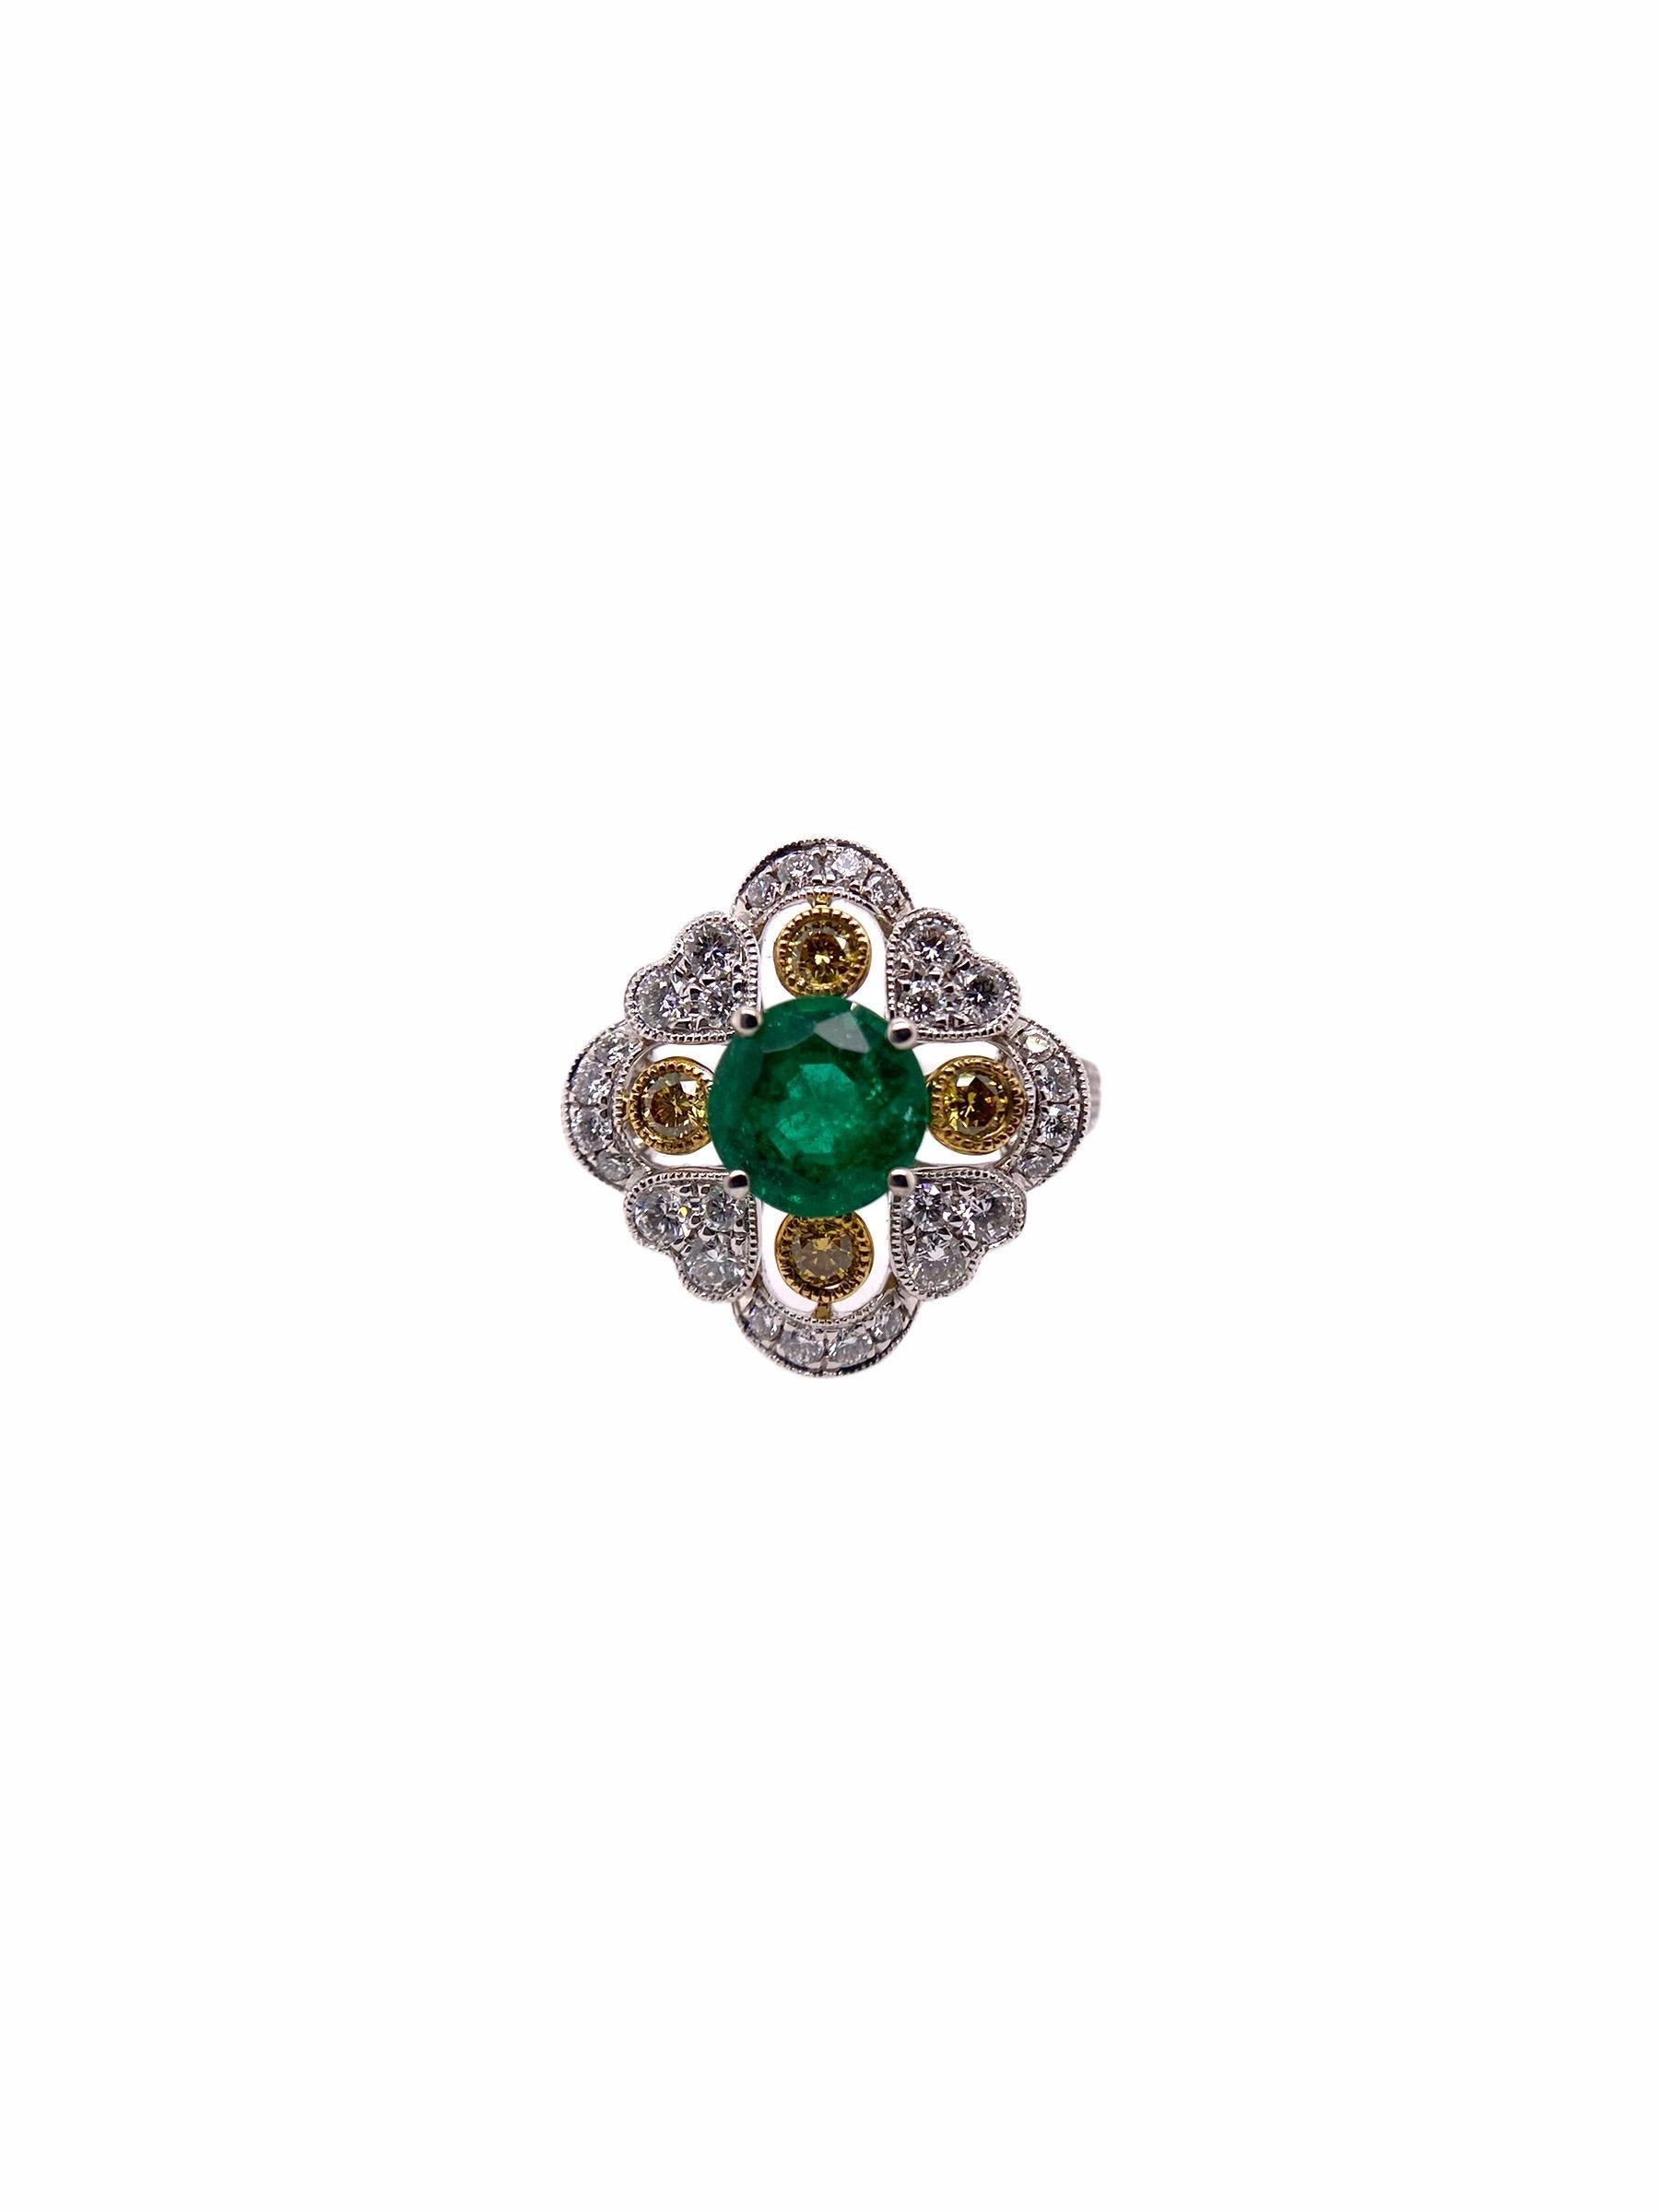 PARIS Craft House Deco inspired Emerald Yellow Diamond Ring. At the center of this ring sits a glowing 1.09ct Brilliant-cut Emerald. It is praised by 4 Yellow Diamonds weighing 0.21ct in total. Around them, they are cuddled by 60 White Round